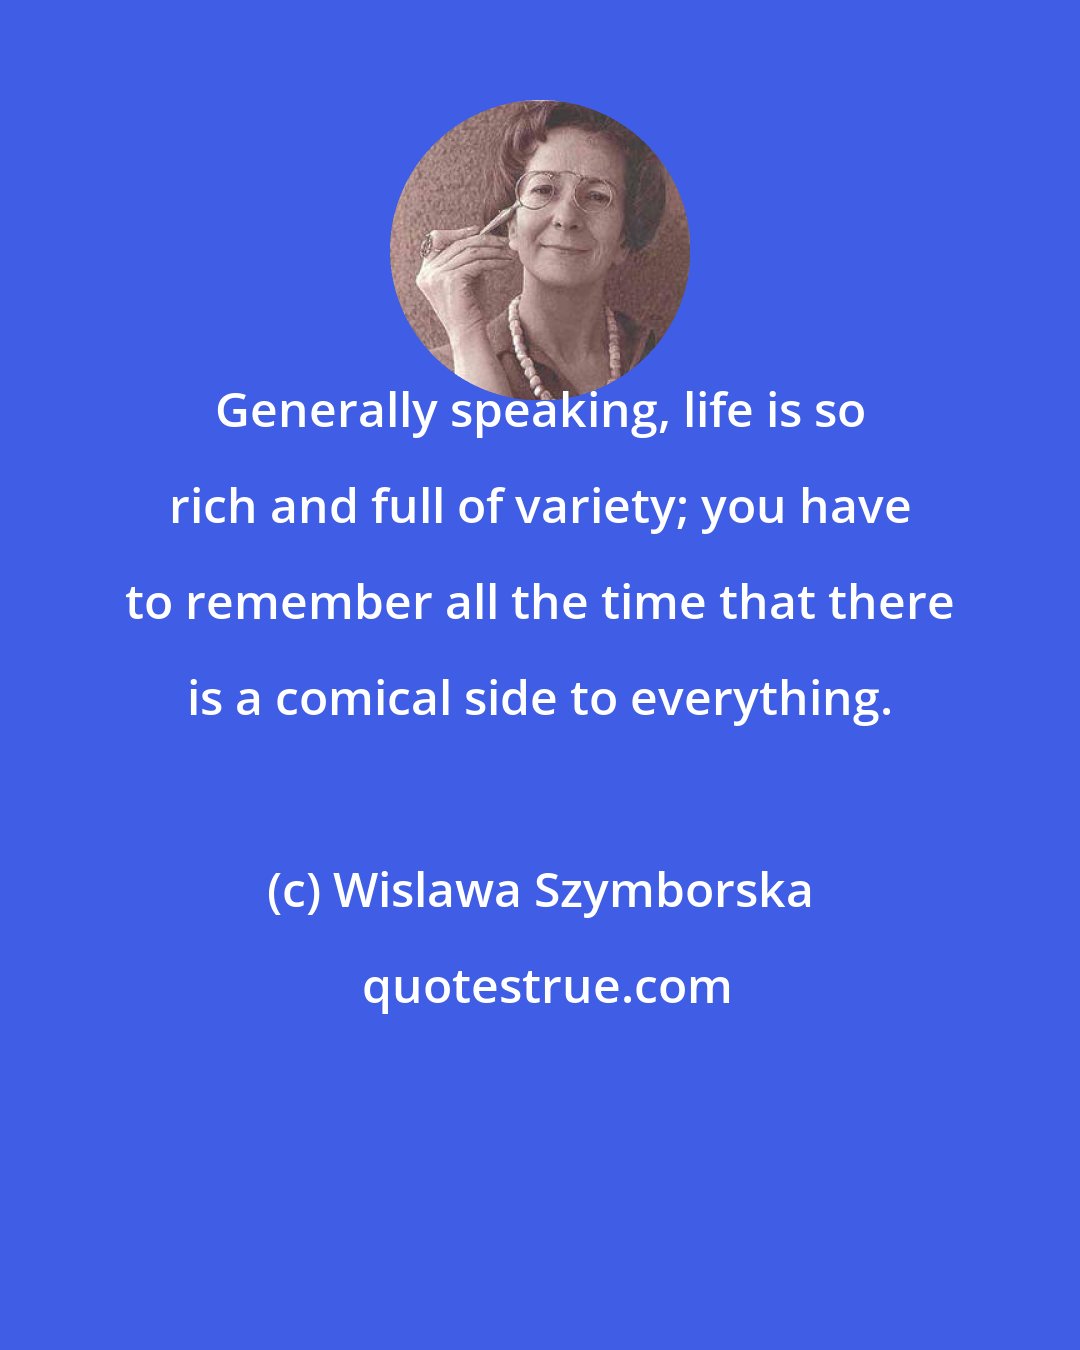 Wislawa Szymborska: Generally speaking, life is so rich and full of variety; you have to remember all the time that there is a comical side to everything.